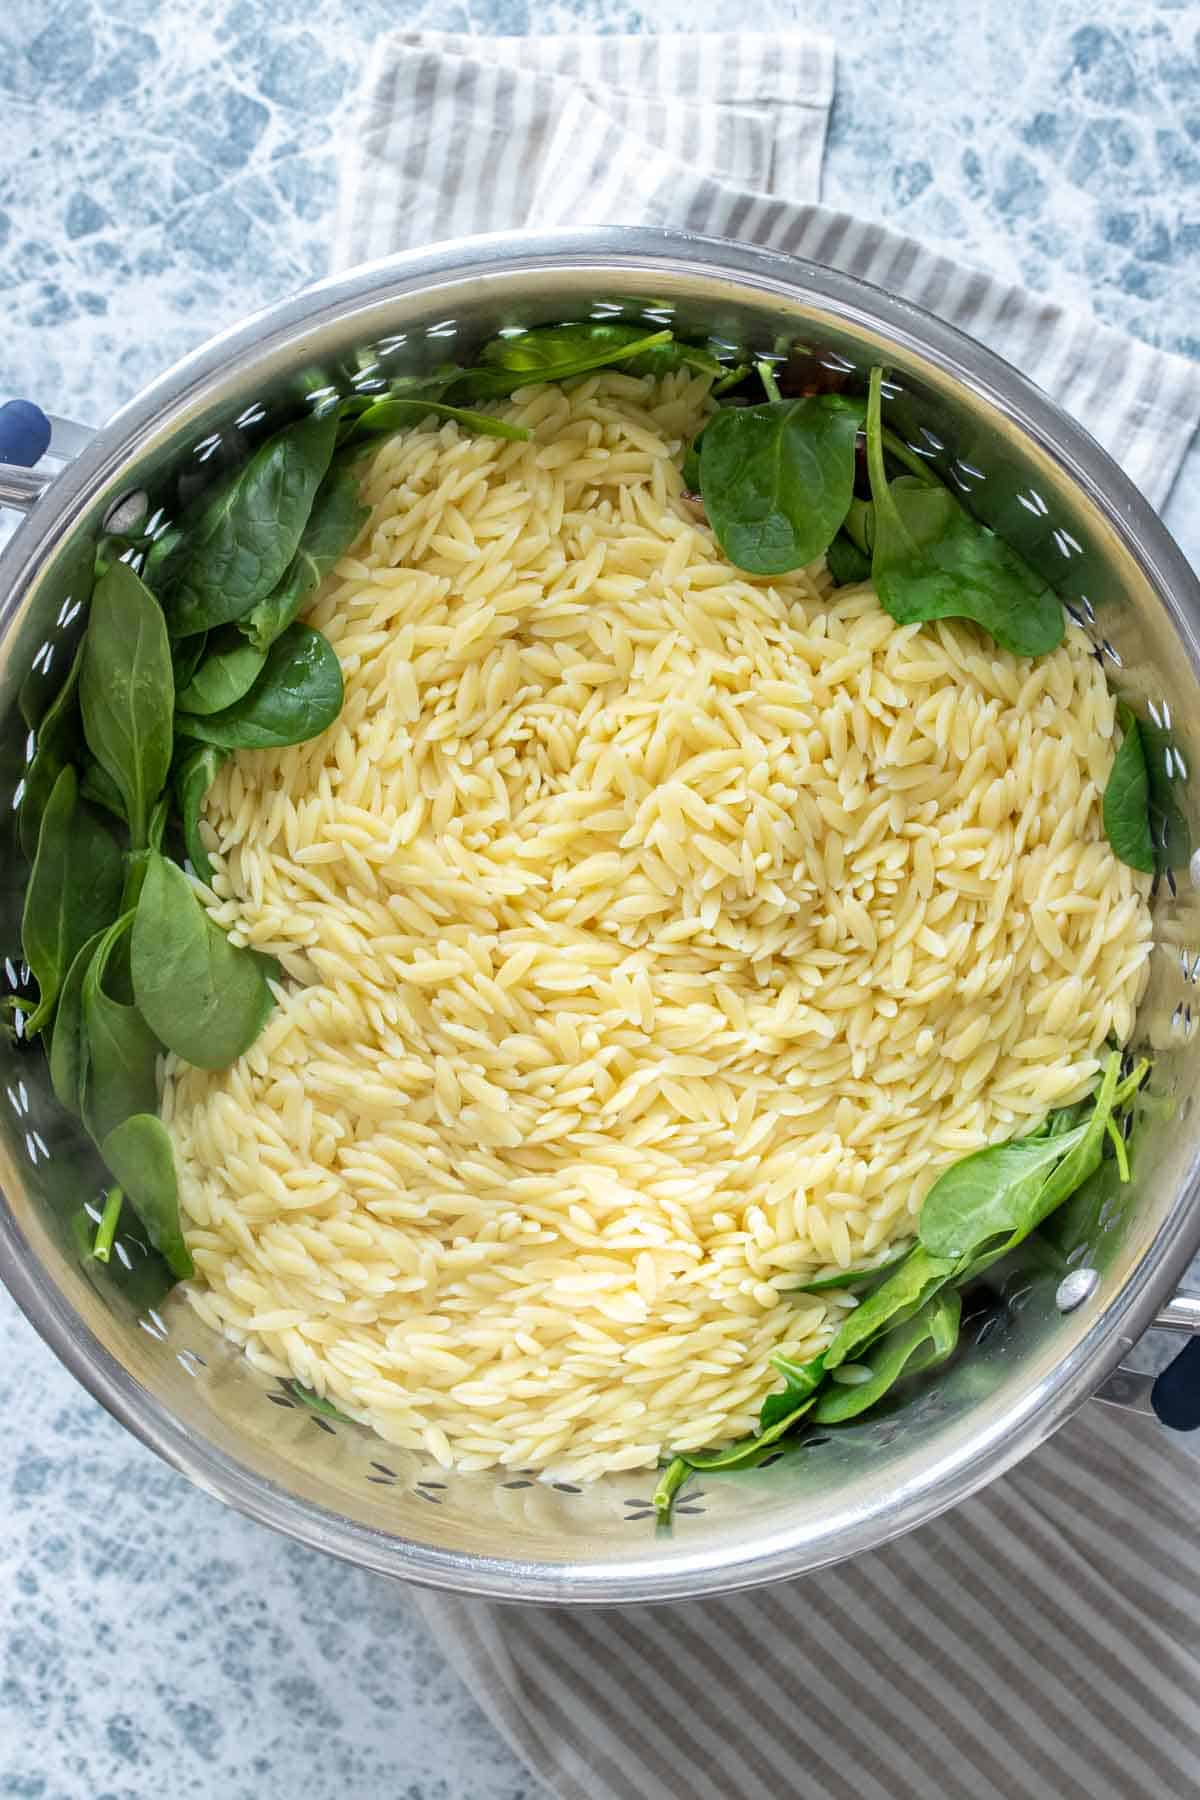 Top view of a pasta strainer with cooked orzo over spinach inside